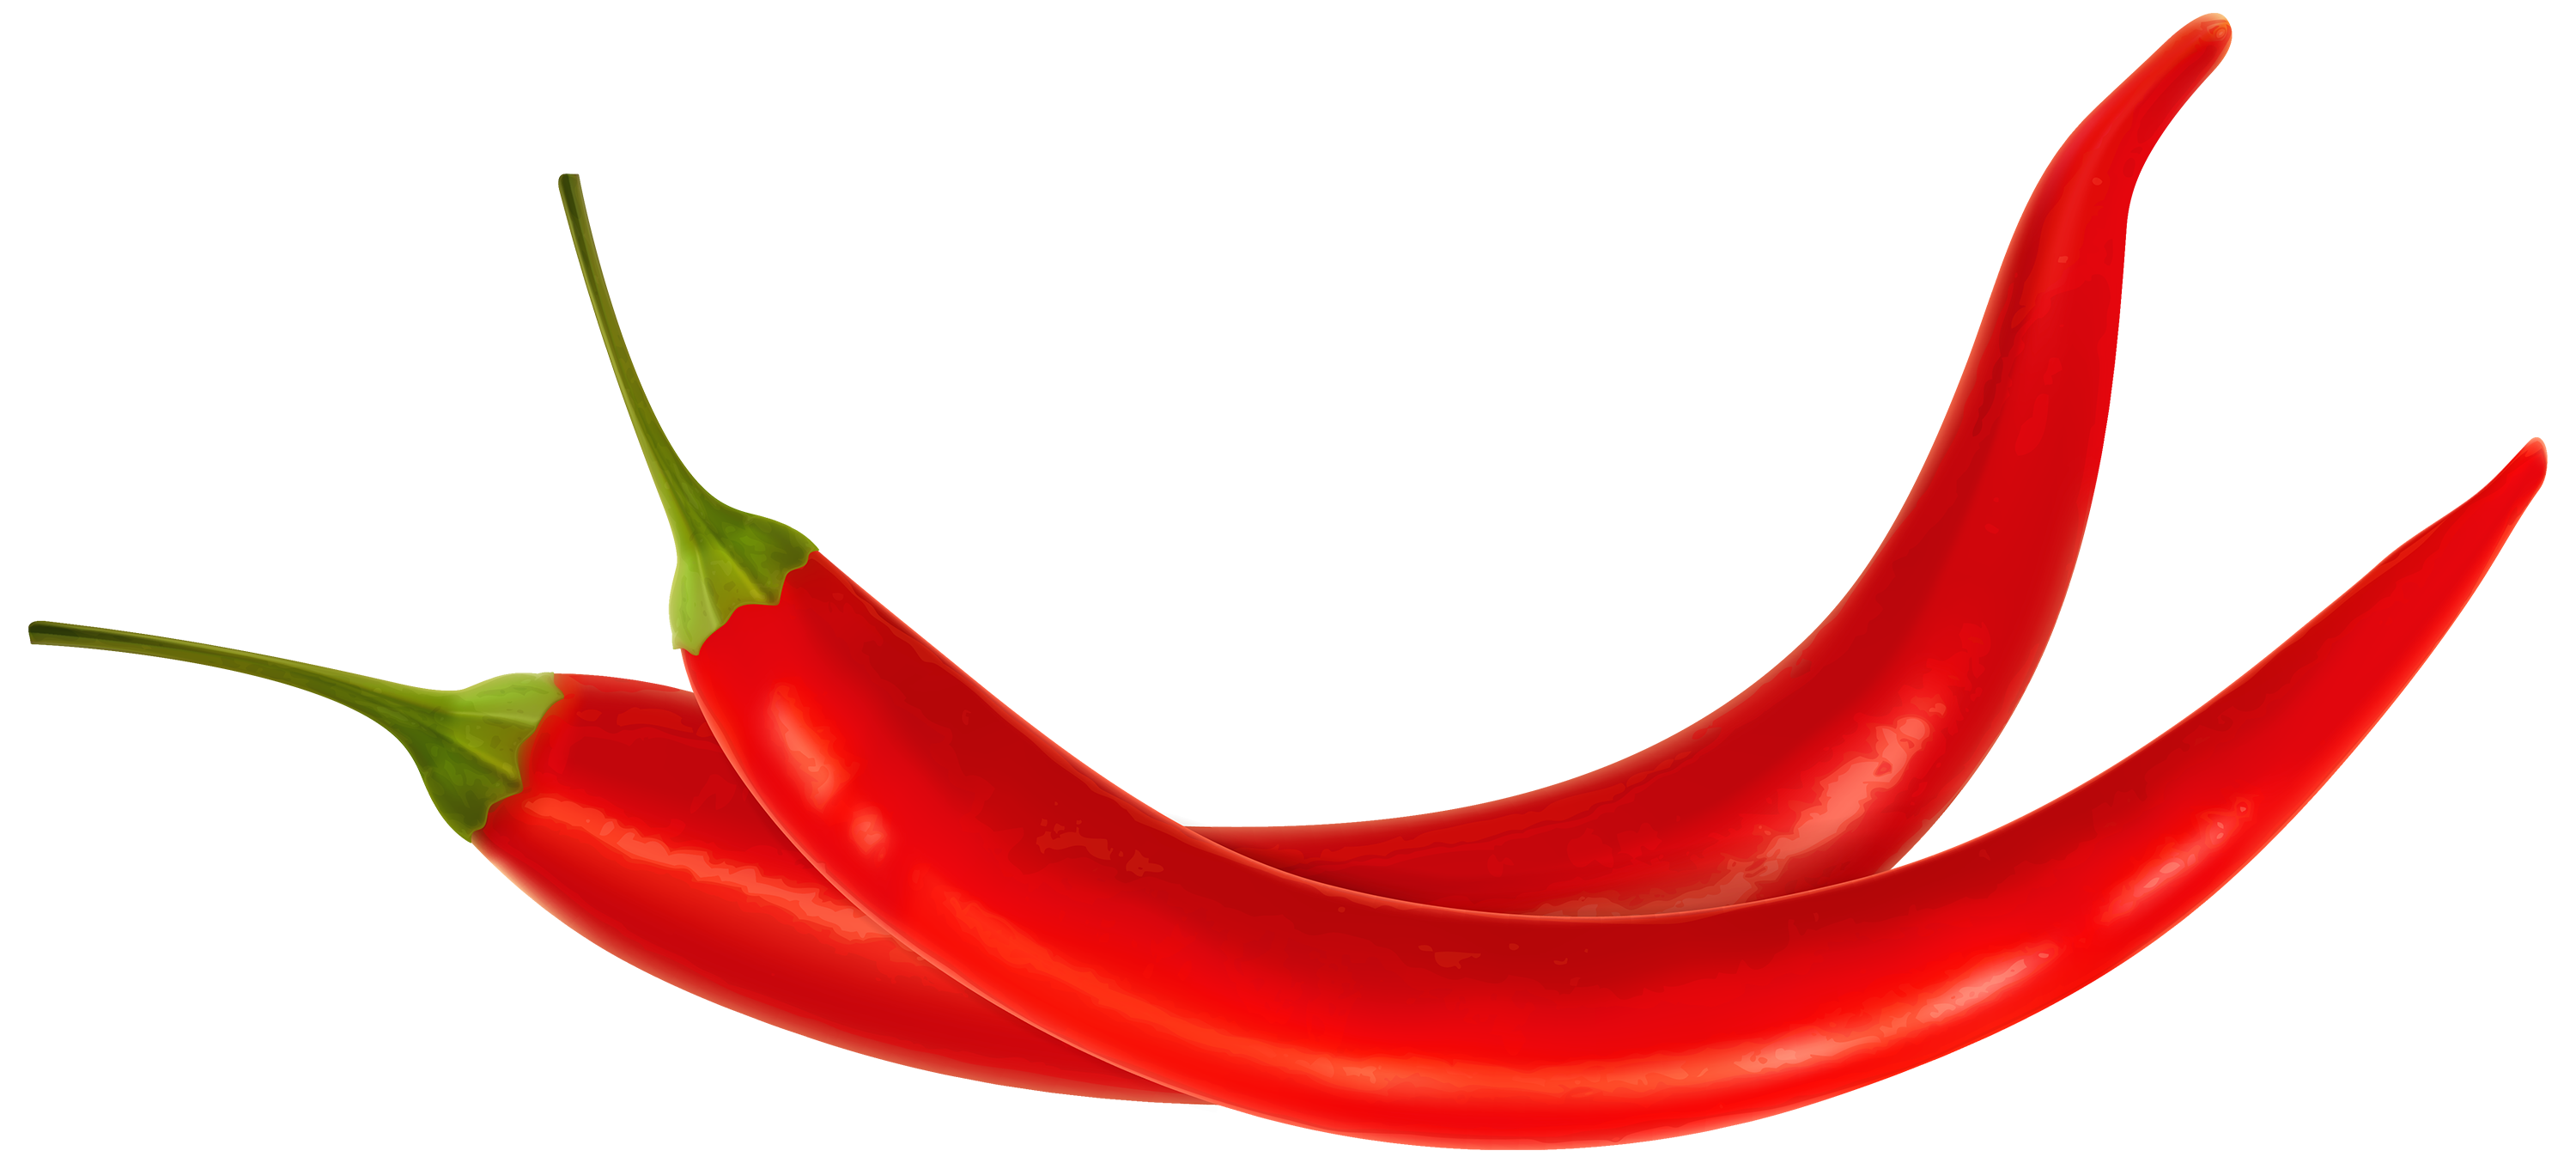 Chili Images Image Download Png Clipart